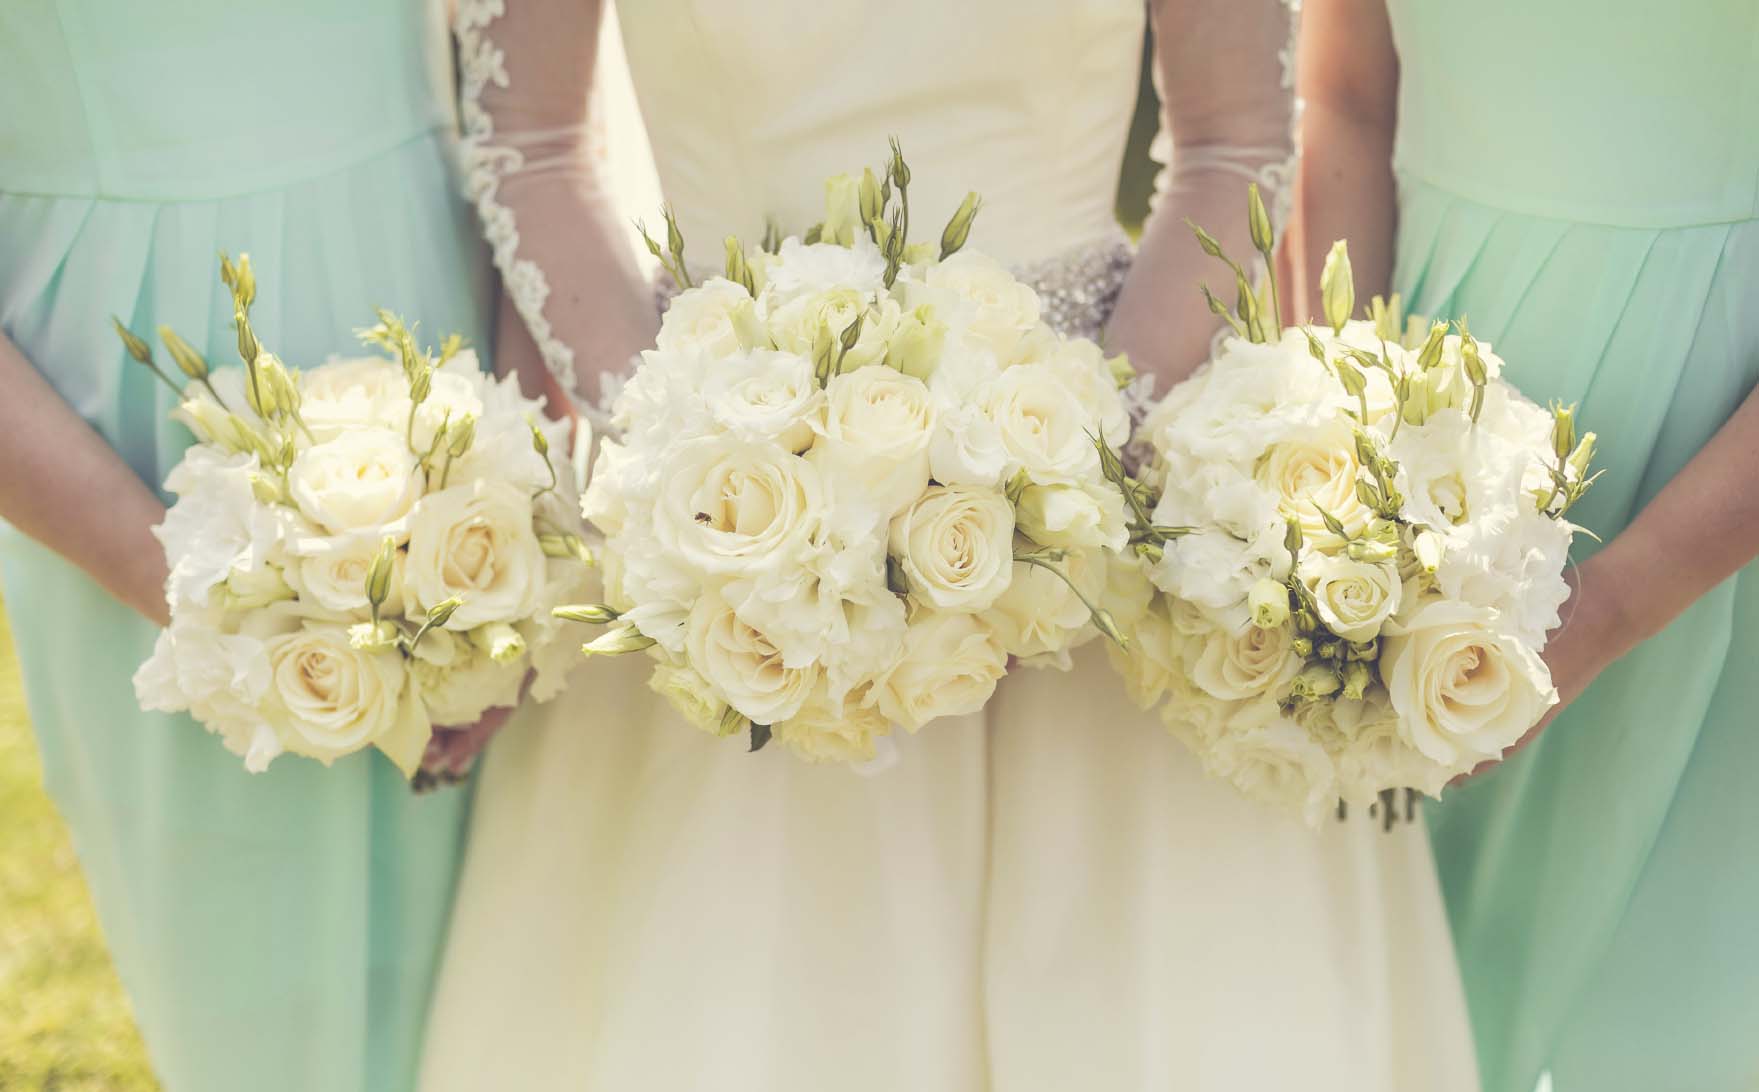 questions to ask bride before committing to being a bridesmaid